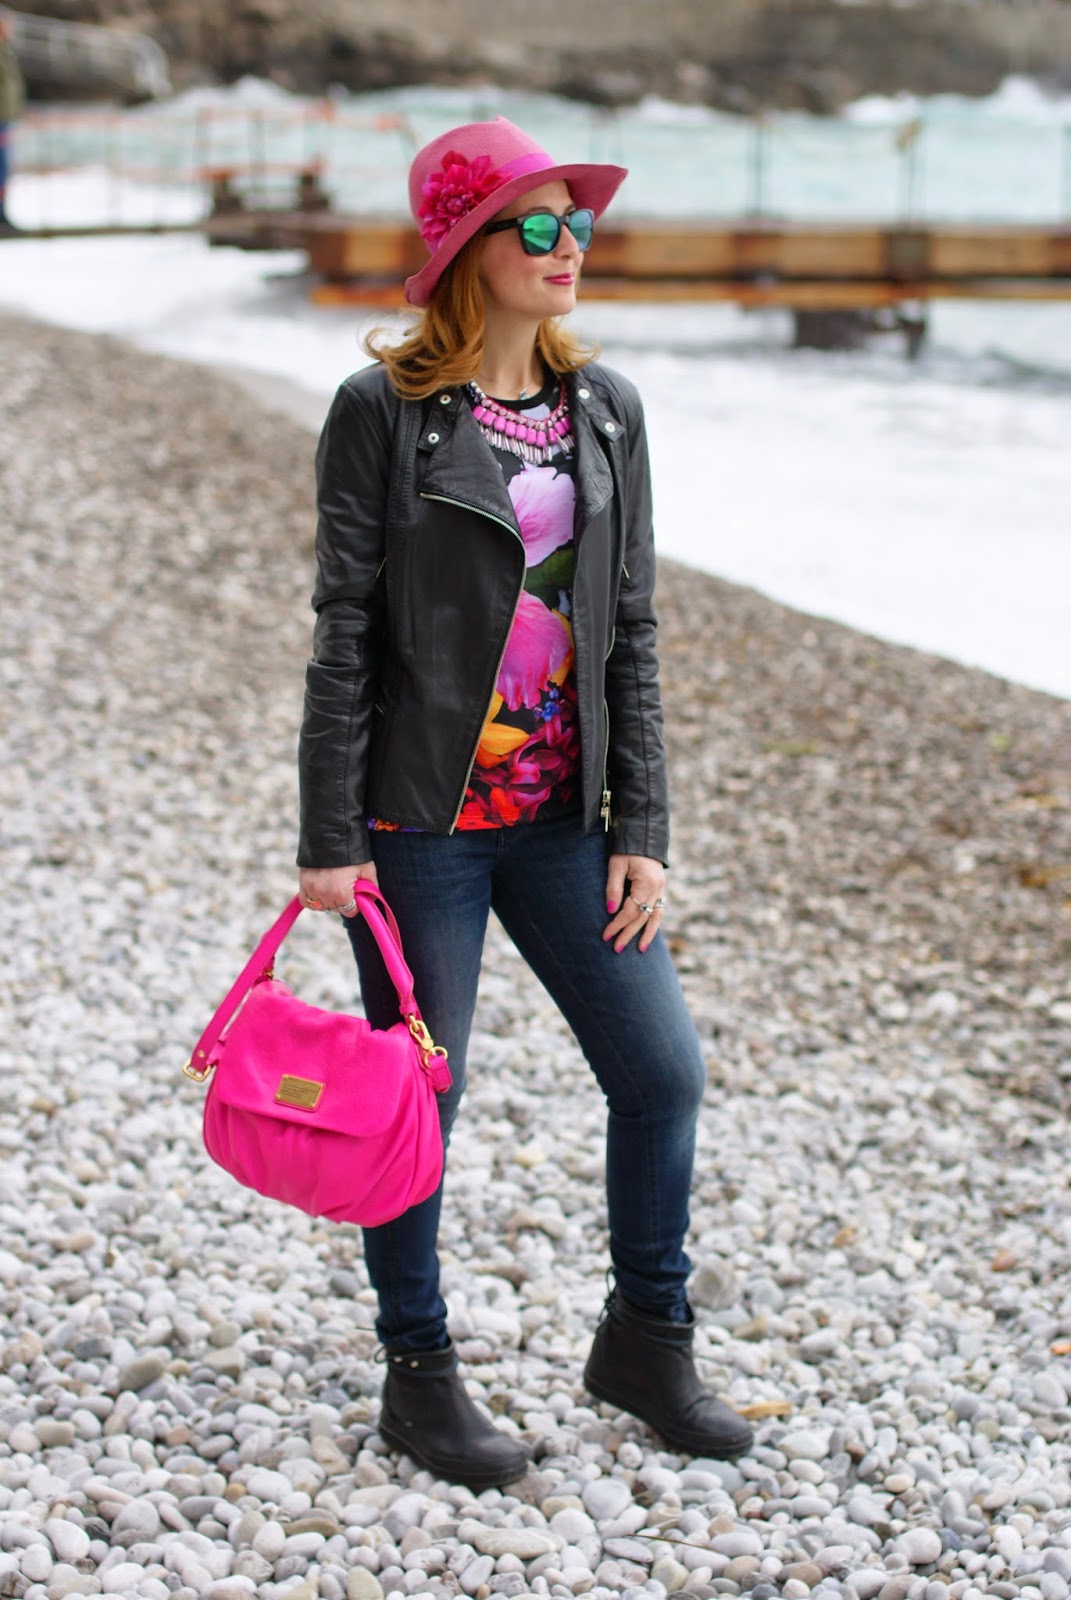 Fuchsia hat, Sodini necklace, Marc by Marc Jacobs lil ukita bag, Ruco Line boots, Fashion and Cookies, fashion blogger